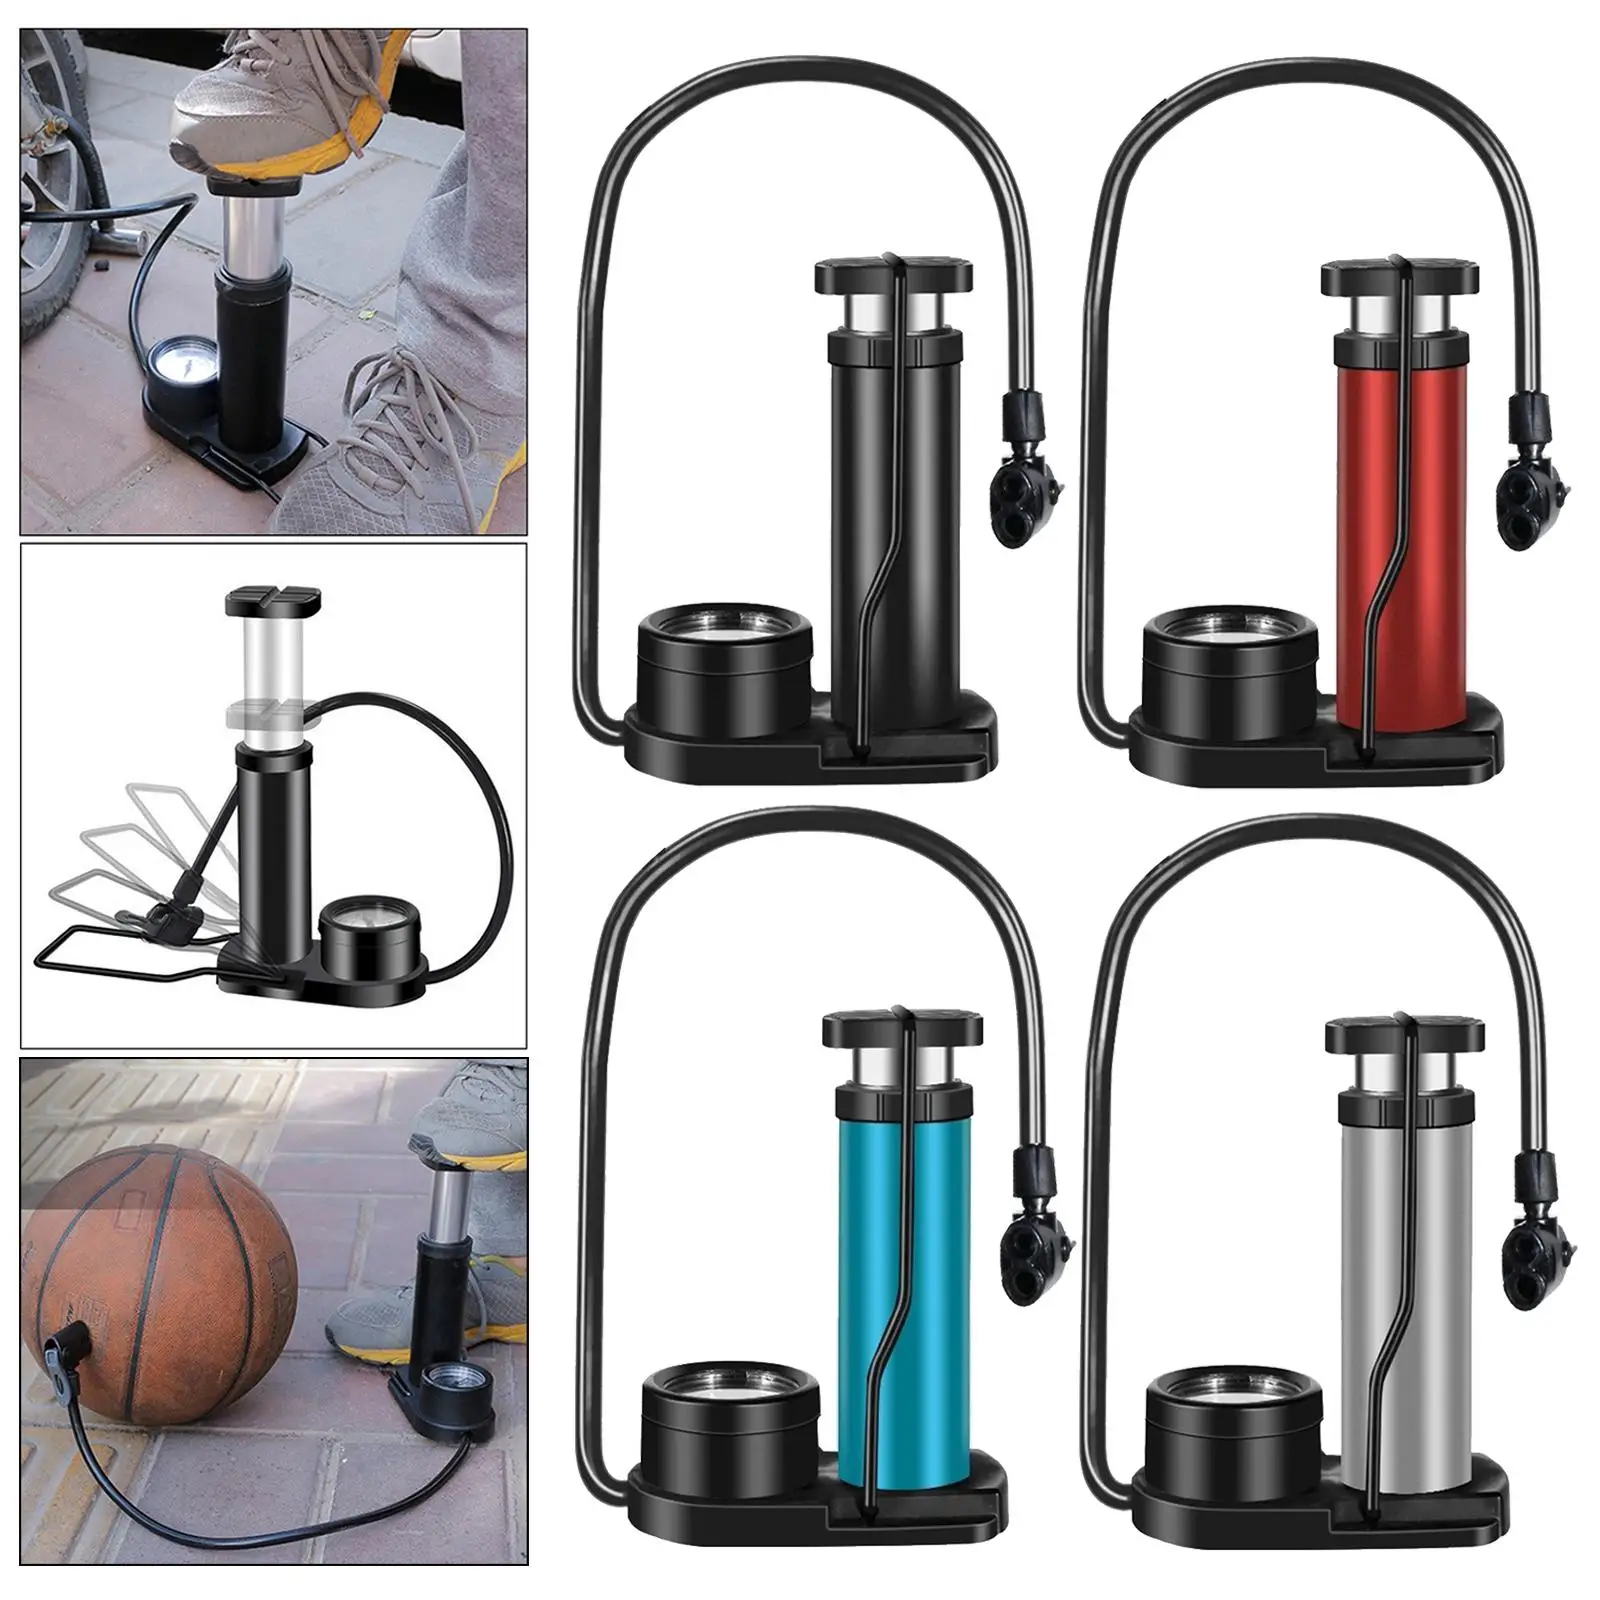 Portable Mini Tire Pump, Foot Activated Pump, Tyre Inflator with Pressure Gauge for Bikes, Motorcycles